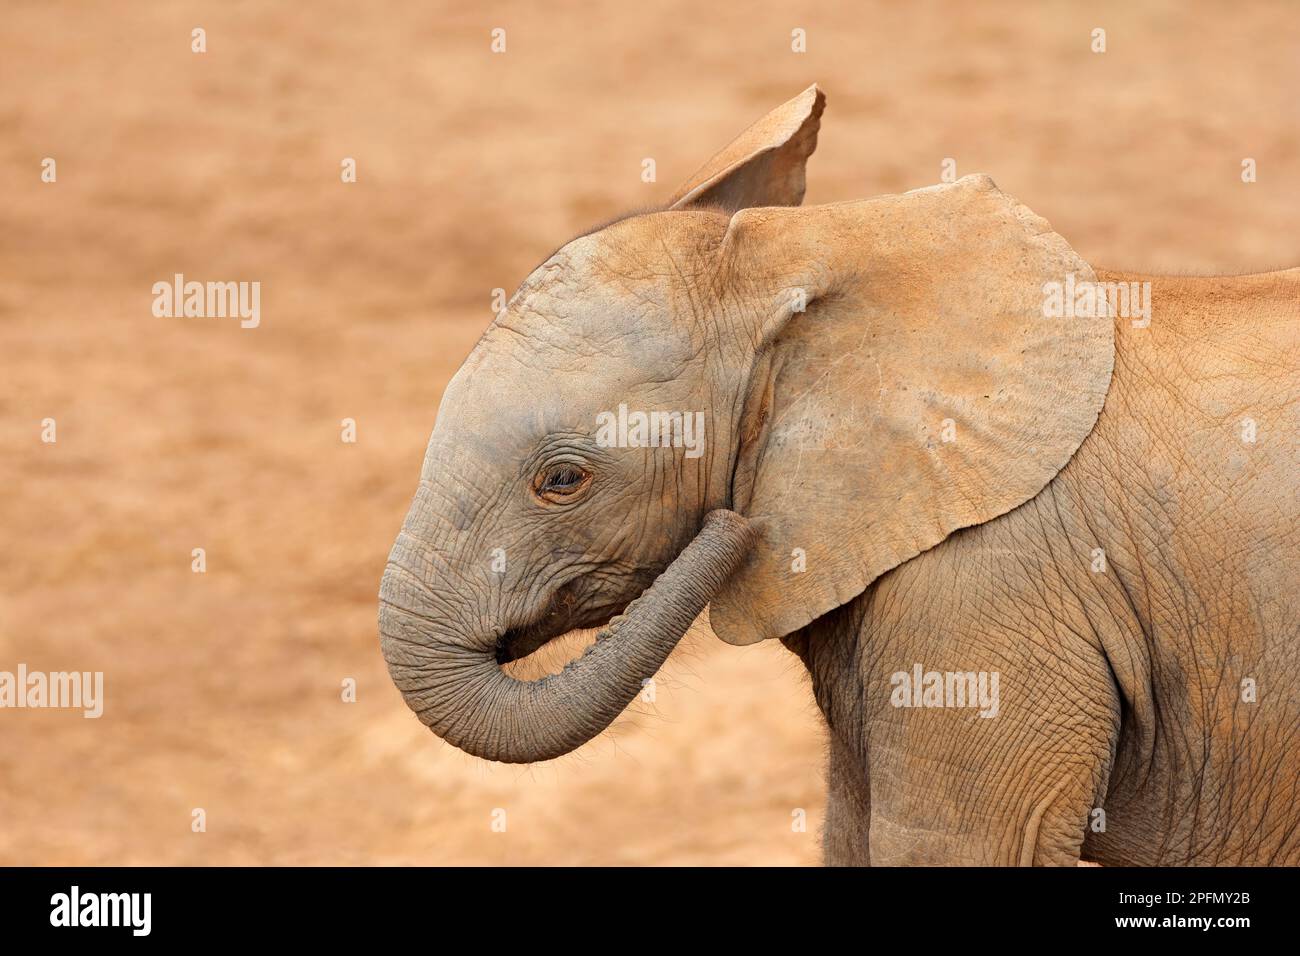 Portrait of a young African elephant (Loxodonta africana), Addo Elephant National park, South Africa Stock Photo